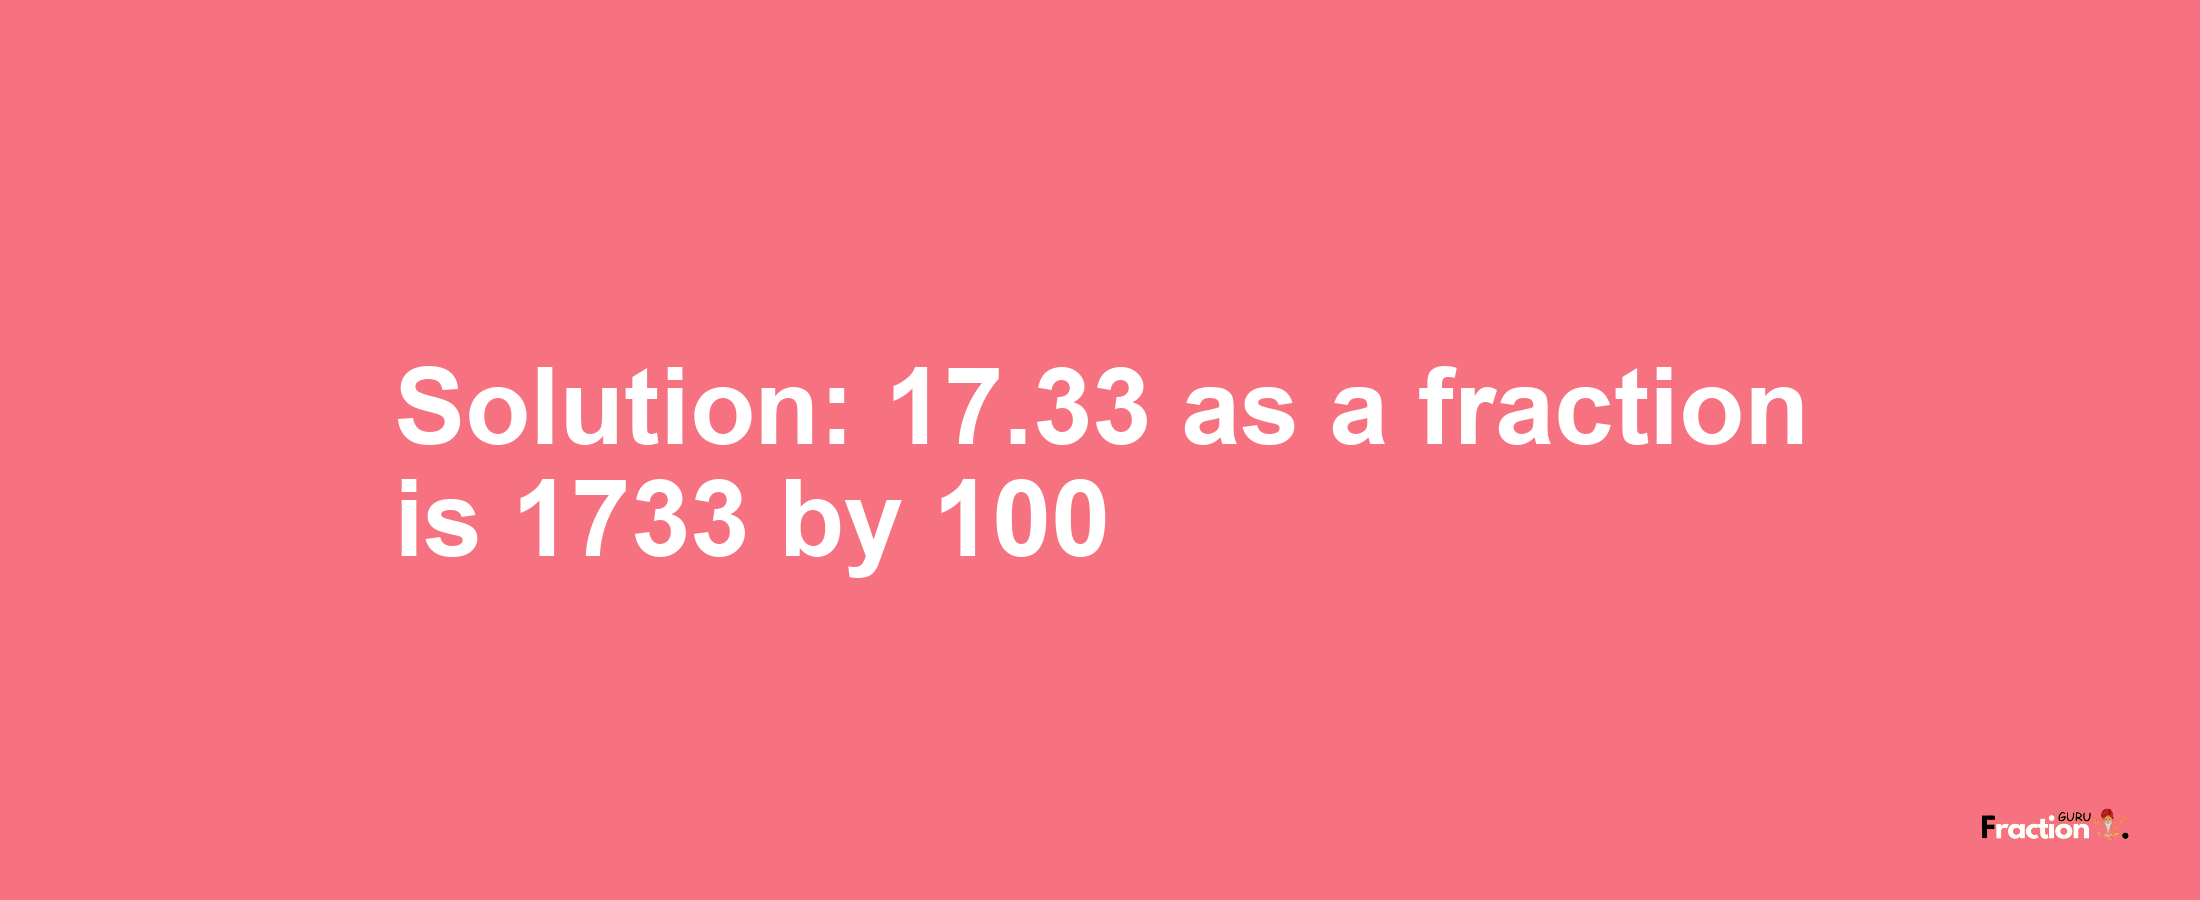 Solution:17.33 as a fraction is 1733/100